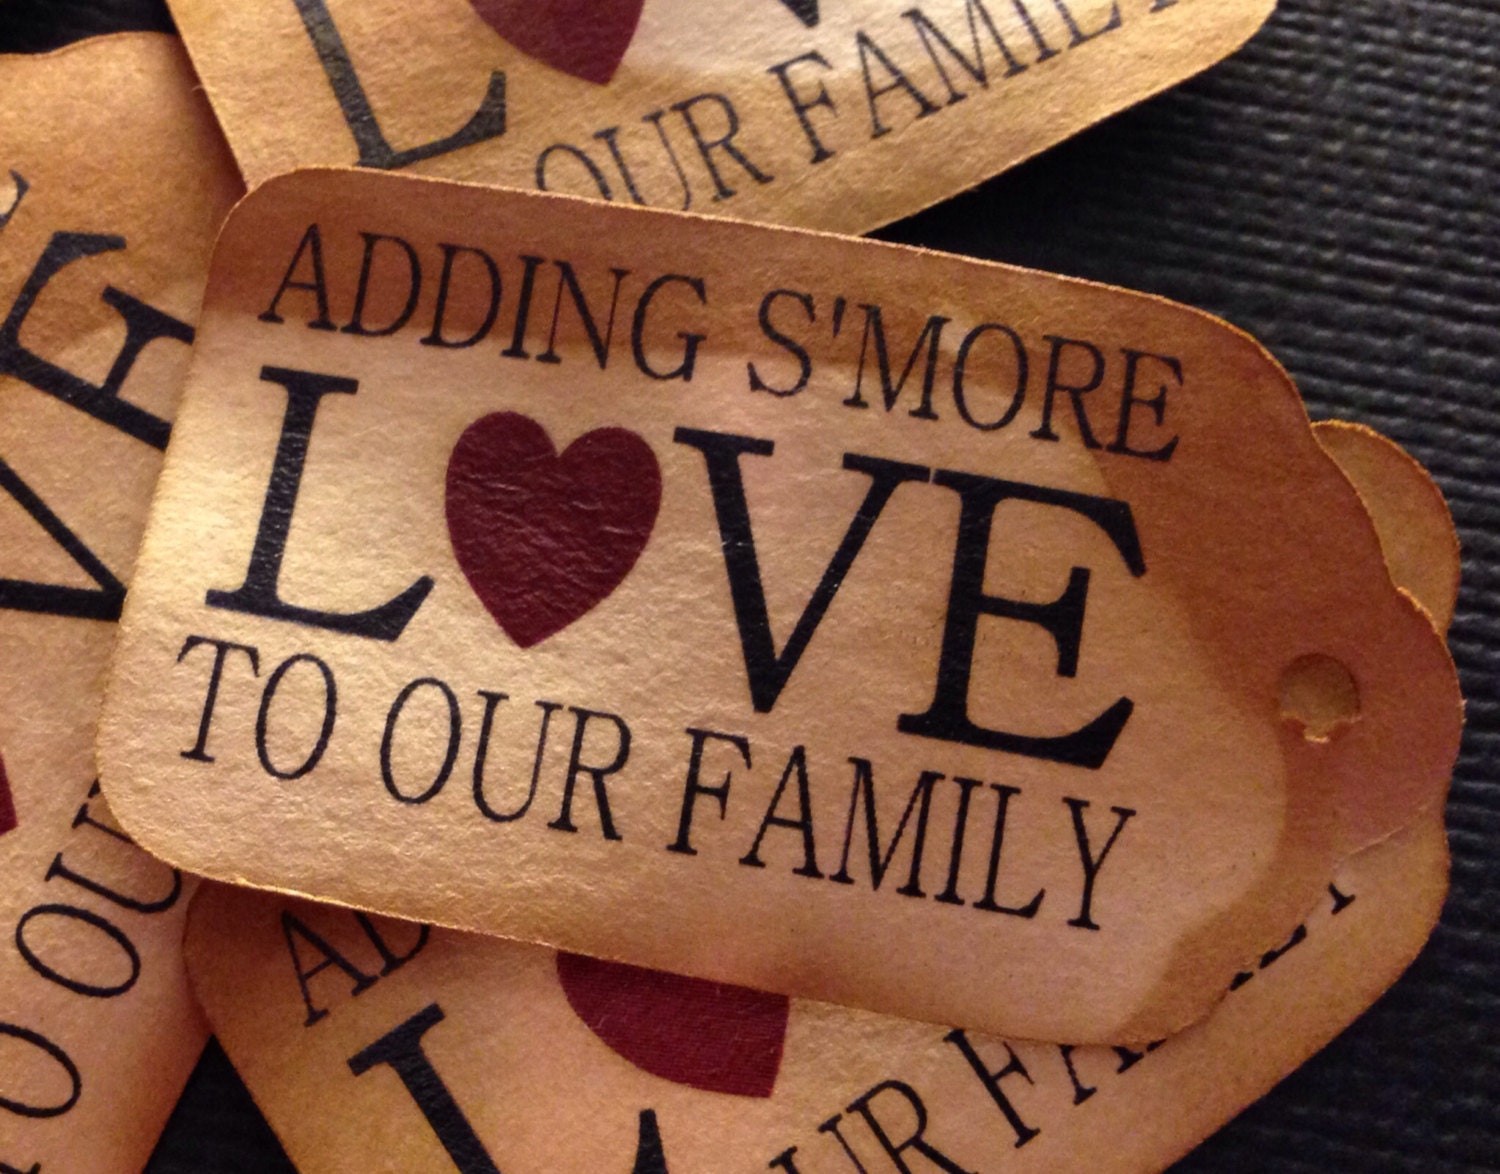 adding-s-more-love-to-our-family-50-small-2-favor